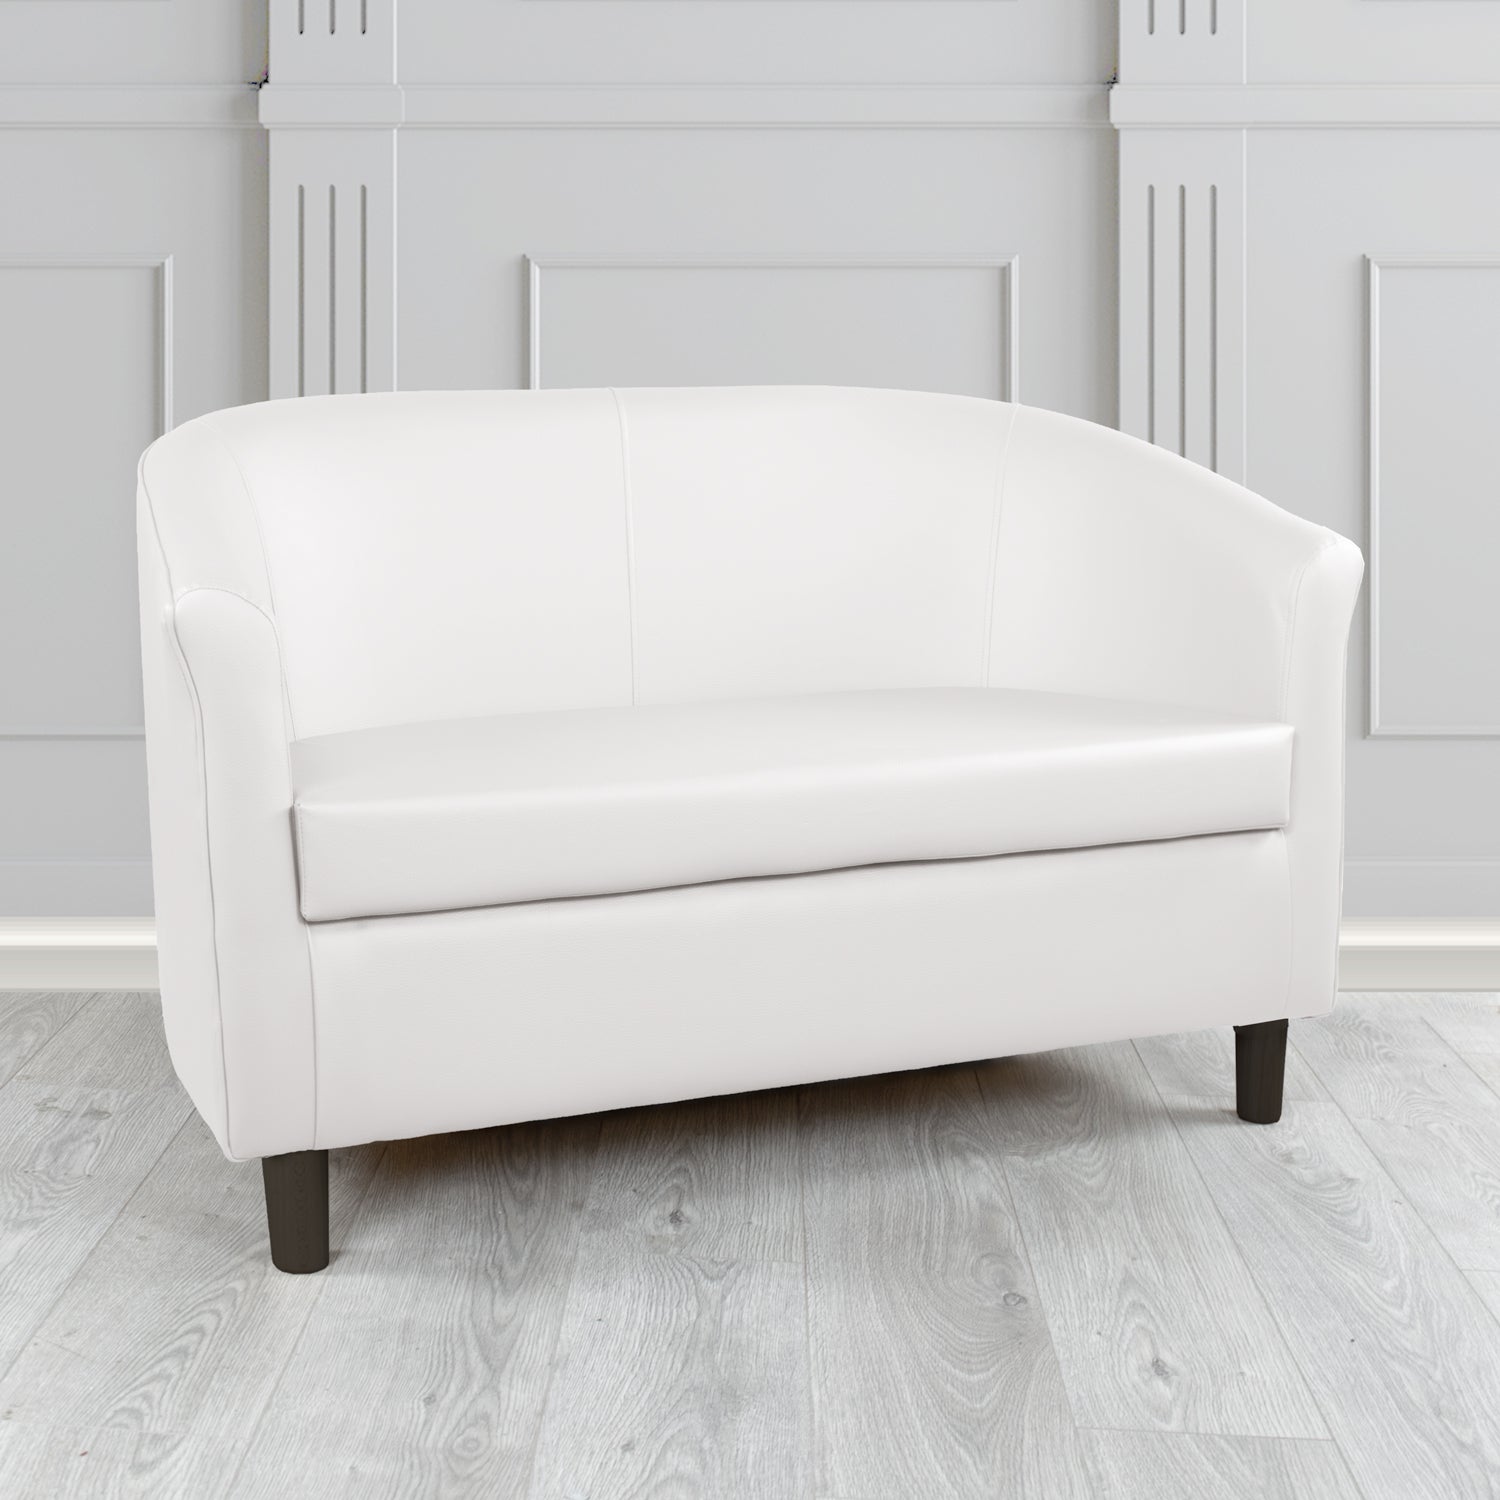 Tuscany 2 Seater Tub Sofa in Madrid White Faux Leather - The Tub Chair Shop